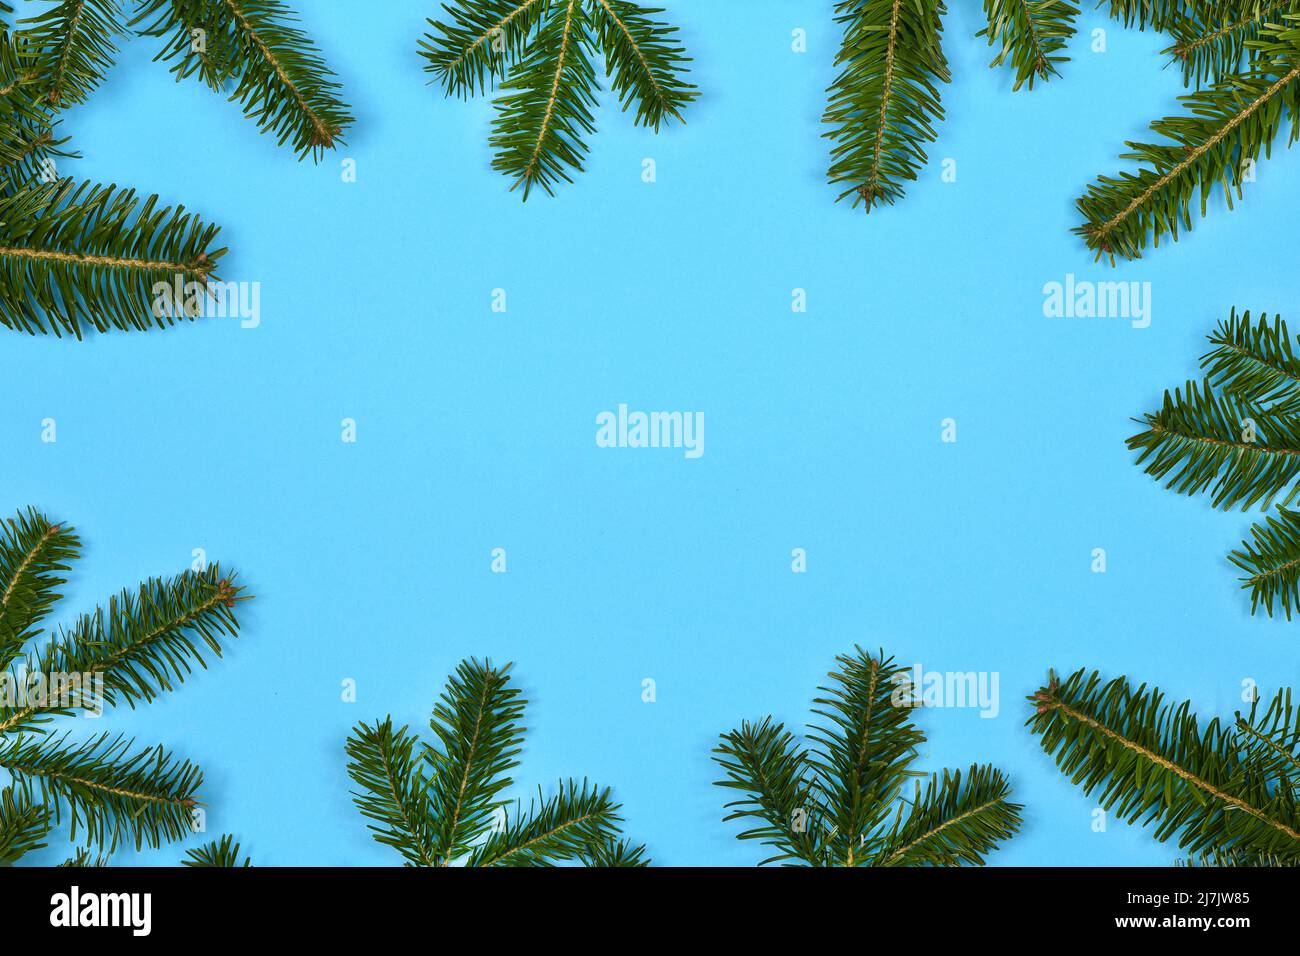 Spruce branches in the form of a frame isolated on blue background. High resolution photo. Full depth of field. Stock Photo